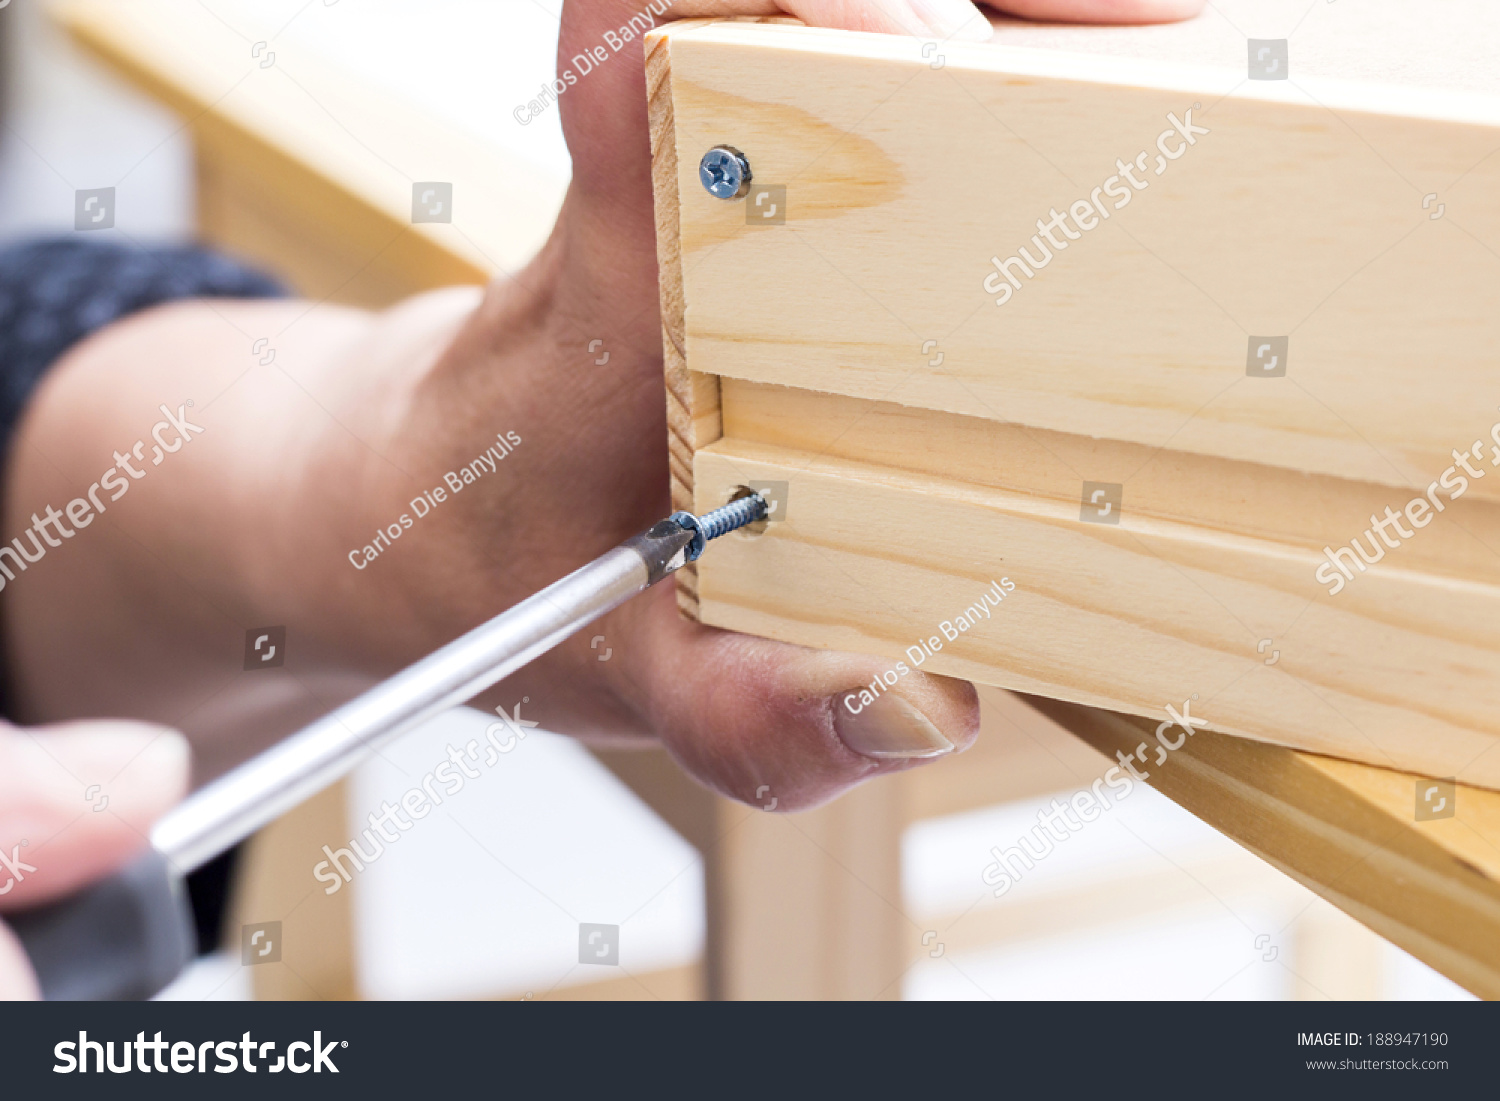 A carpenter builds a small white table with a screwdriver #188947190